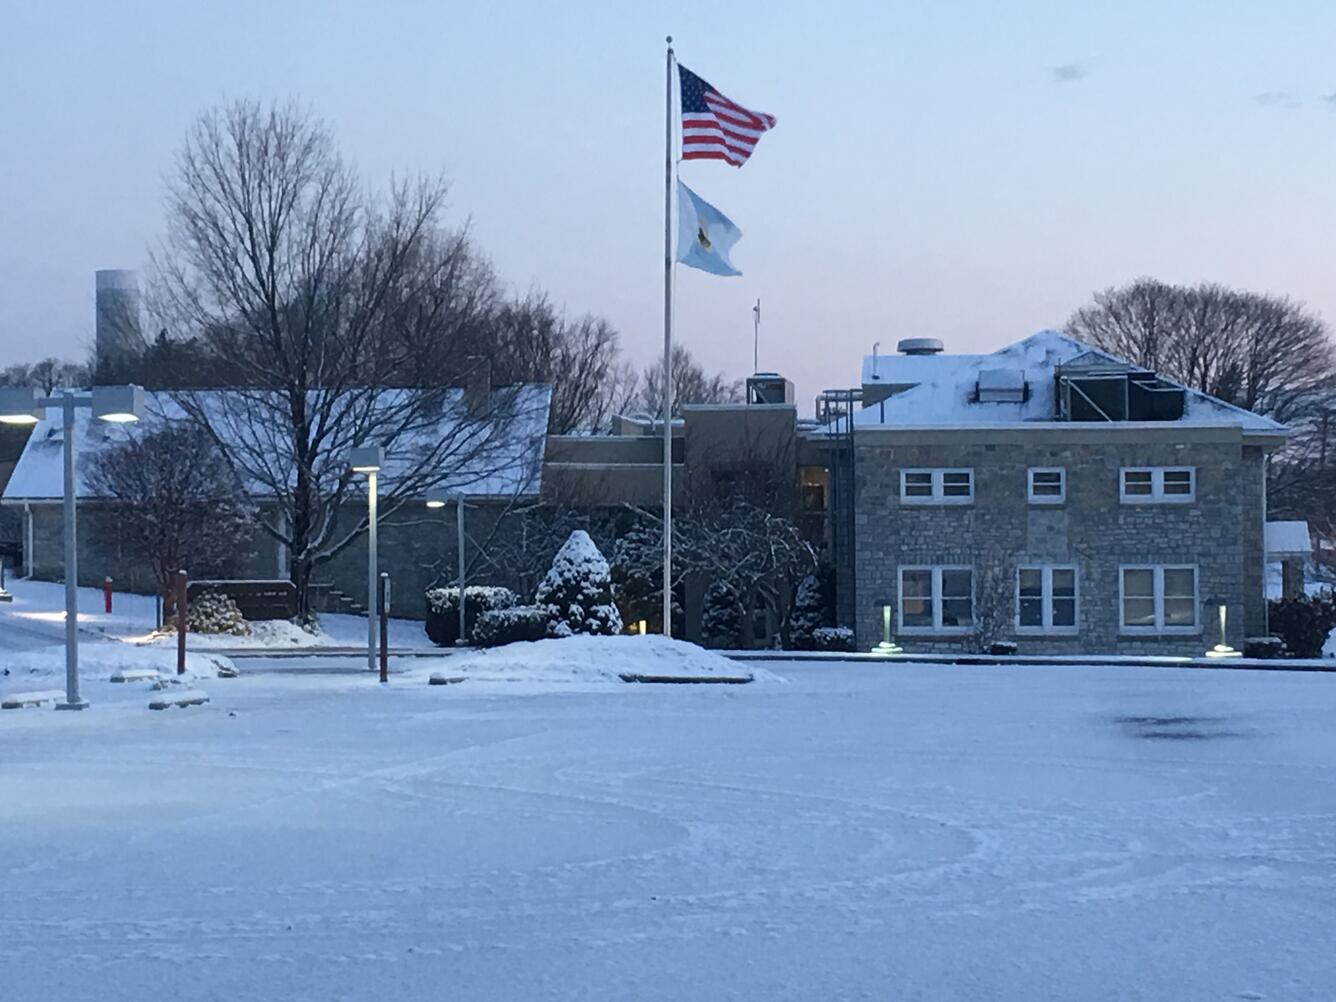 Winter image of USGS Eastern Ecological Science Center, Admin and Aquatic Ecology Lab Building in Kearneysville, WV